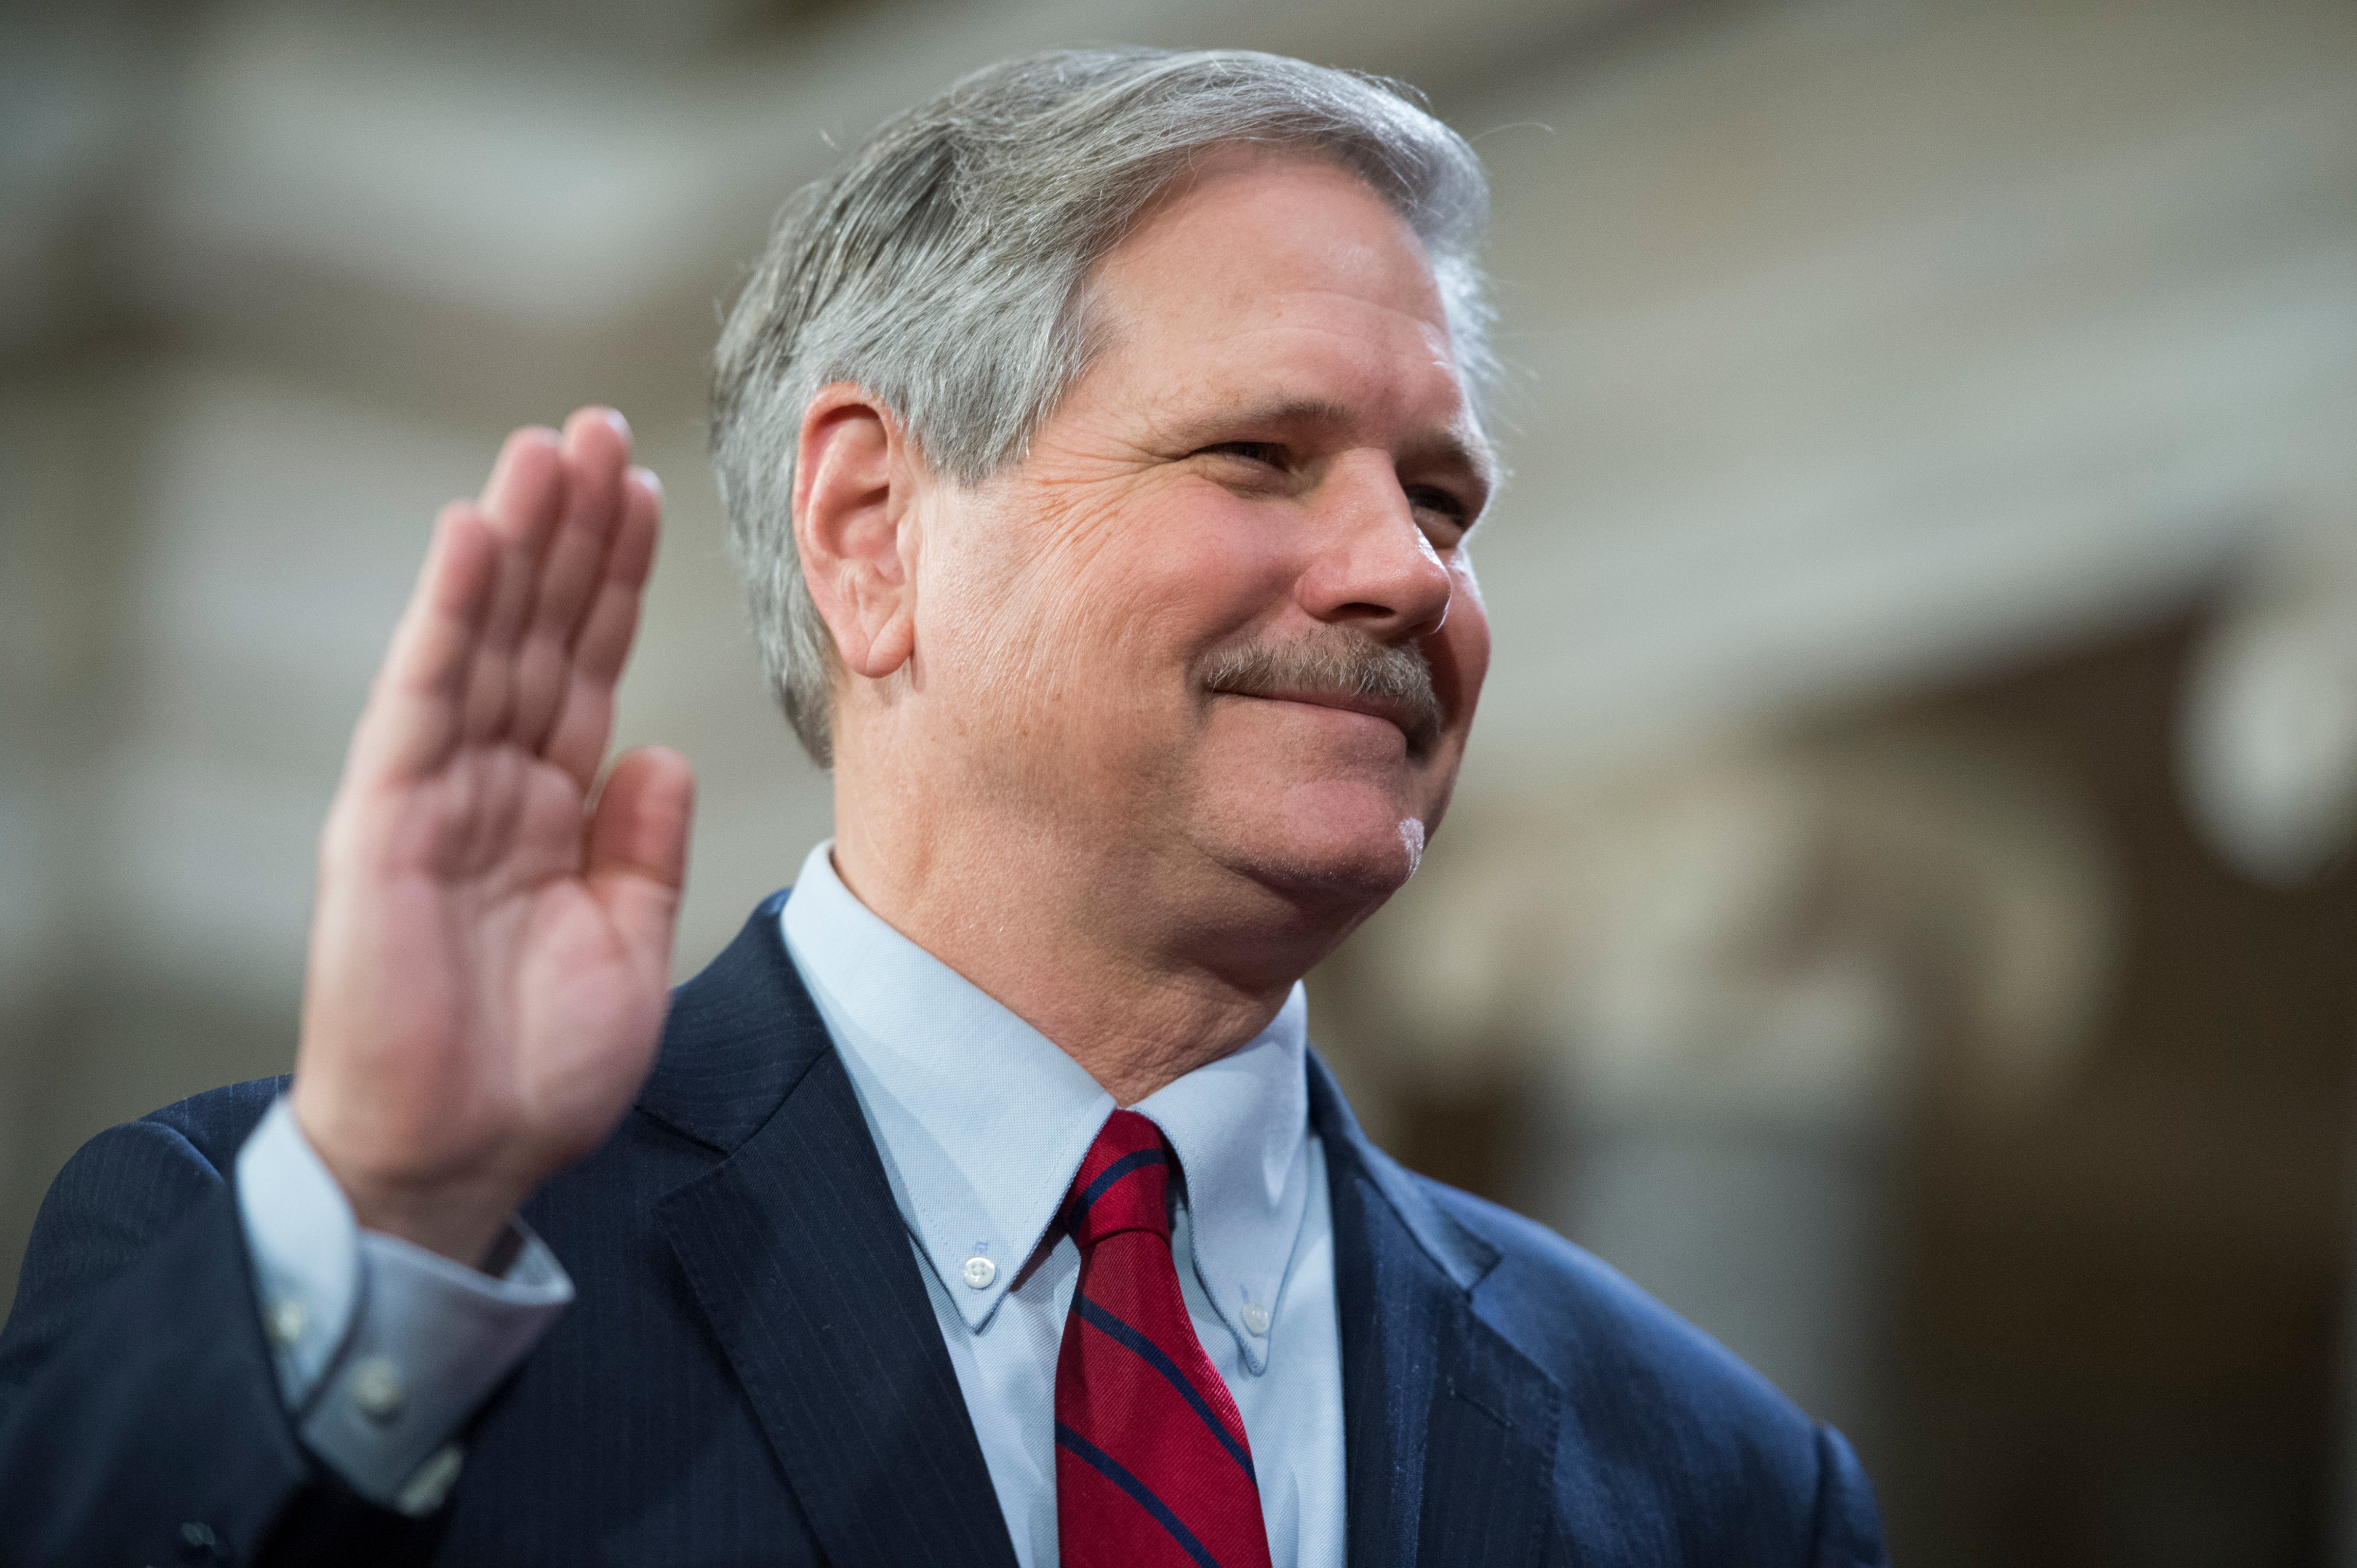 Sen. John Hoeven, R-N.D., is administered an oath by Vice President Joe Biden during a swearing-in ceremony in the Capitol's Old Senate Chamber, January 03, 2016. (Tom Williams&mdash;CQ-Roll Call,Inc./Getty Images)